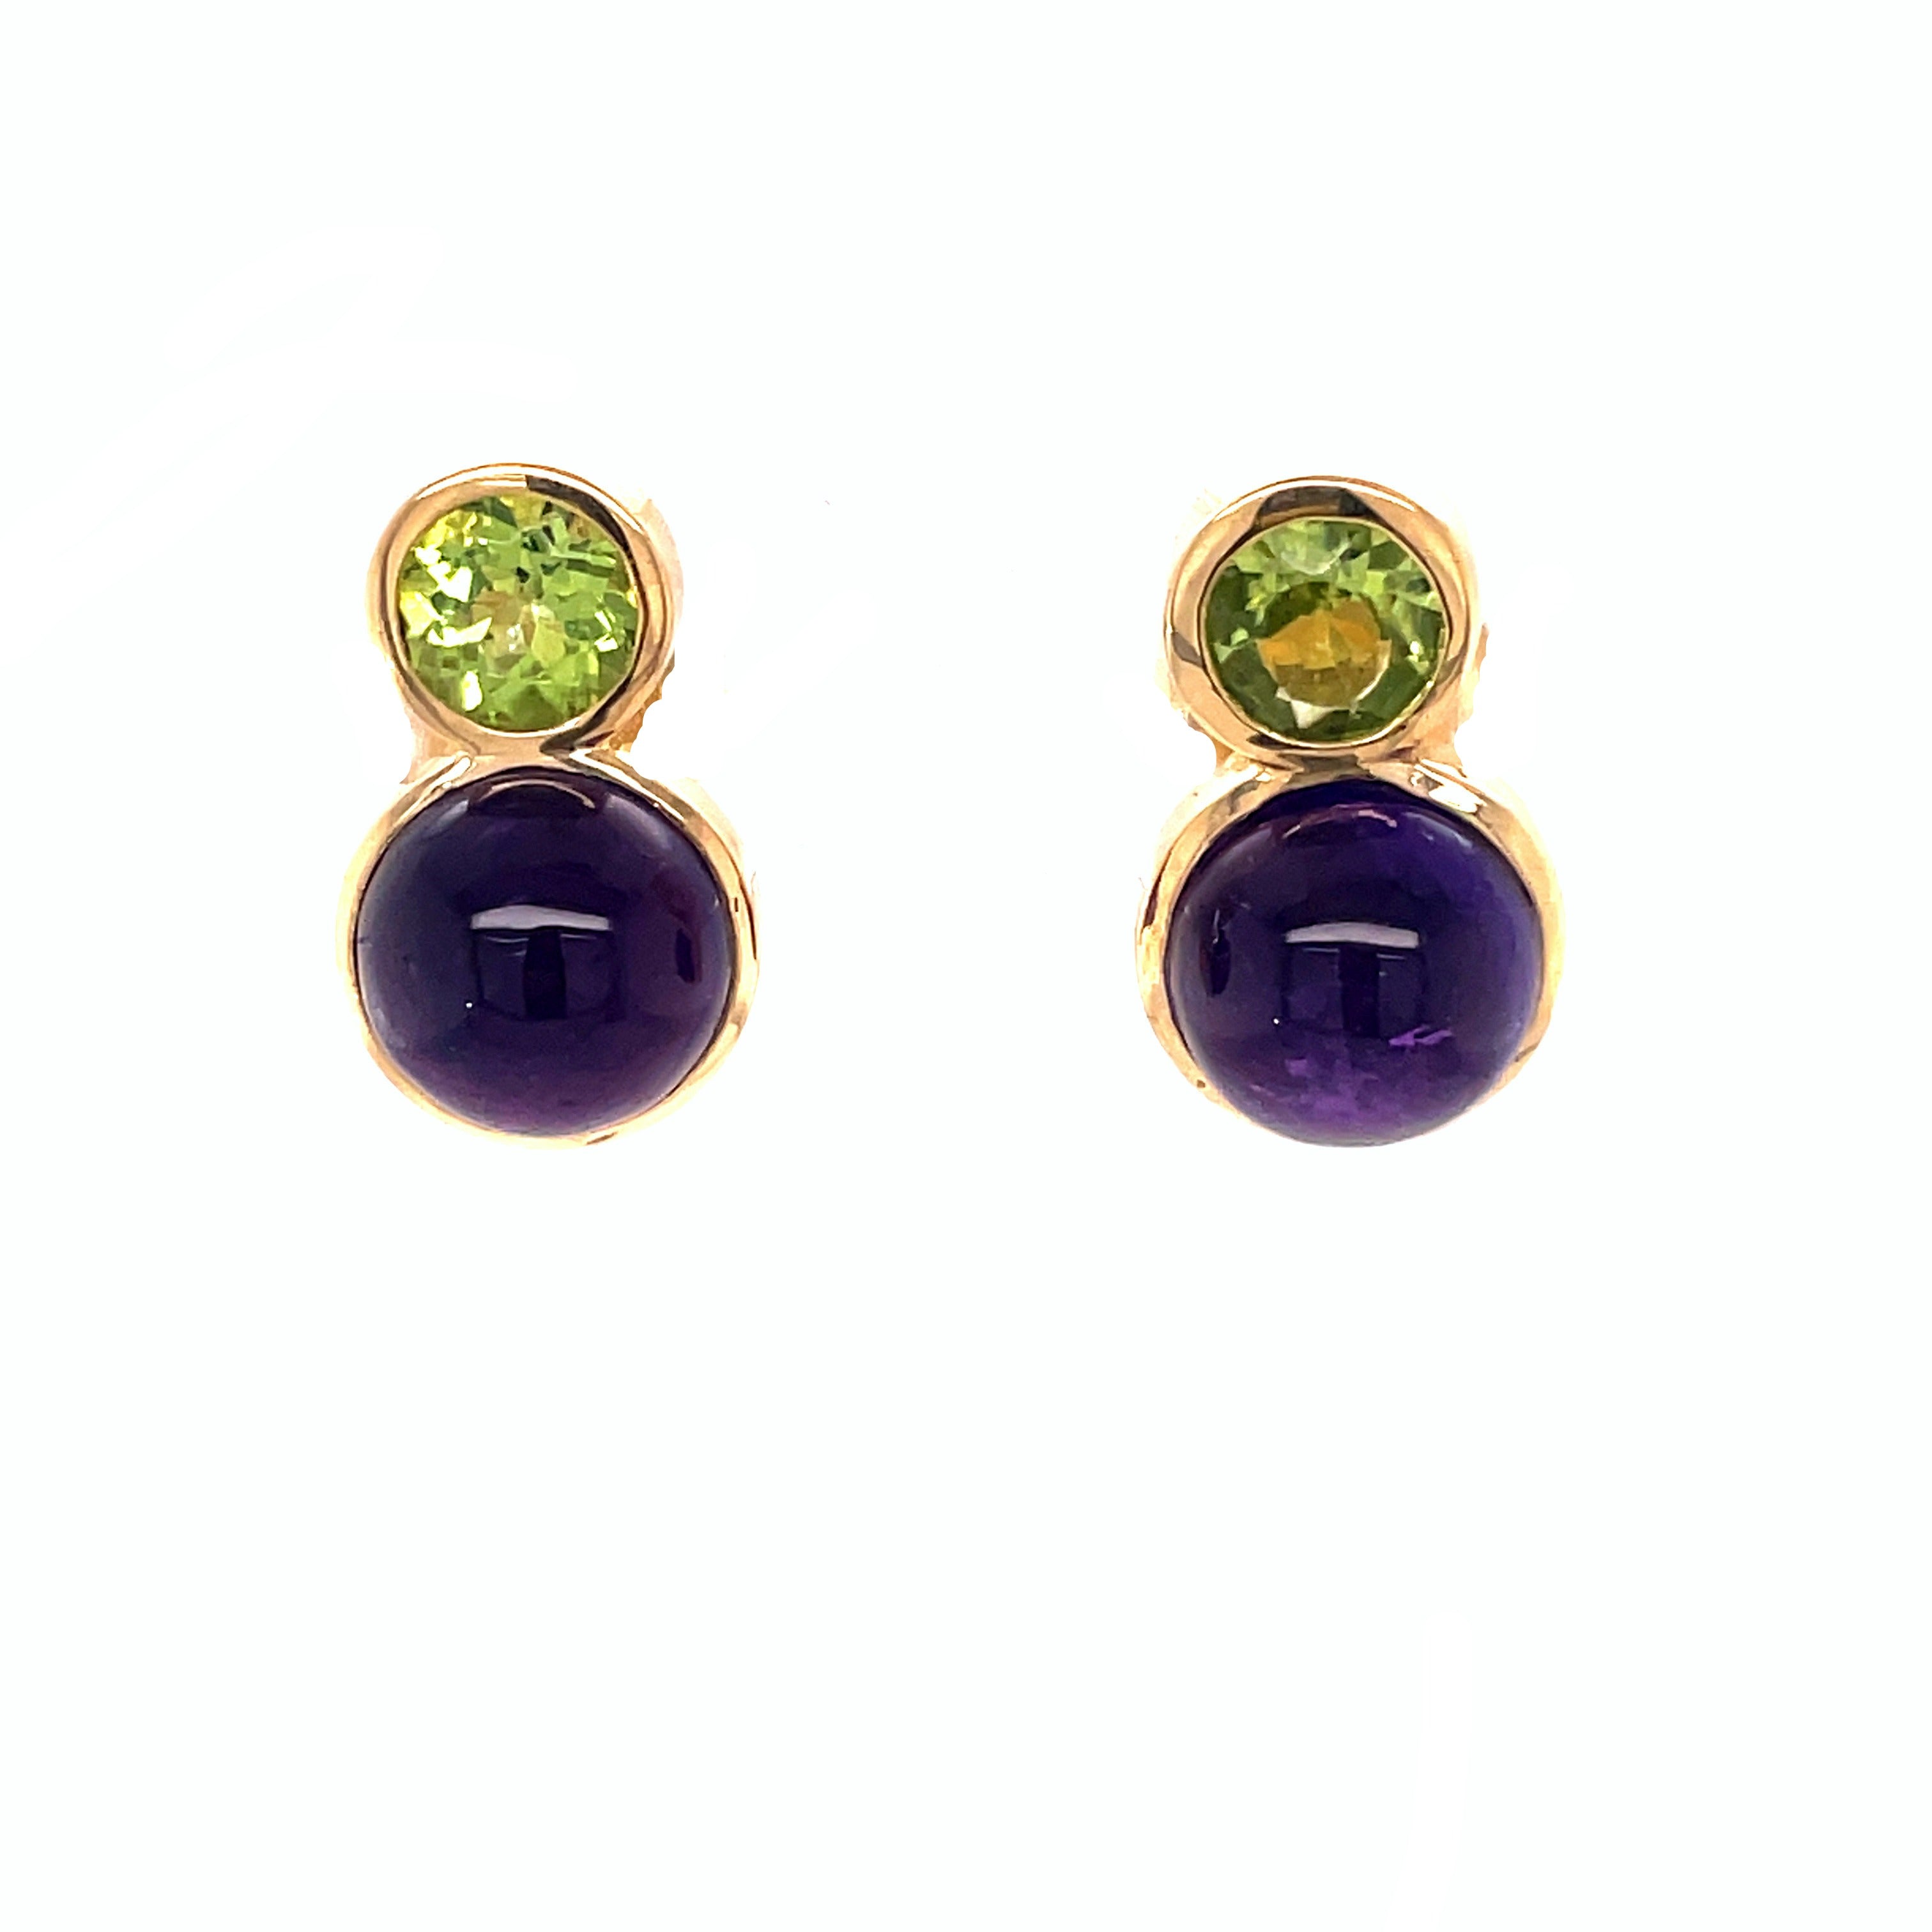 The perfect accessory for any occasion, these 18-karat yellow gold earrings feature an eye-catching combination of round amethyst cabochon and peridot stones. Crafted with a secure friction-back closure and a total length of 15 millimeters, they are a fashion-forward yet timeless piece.